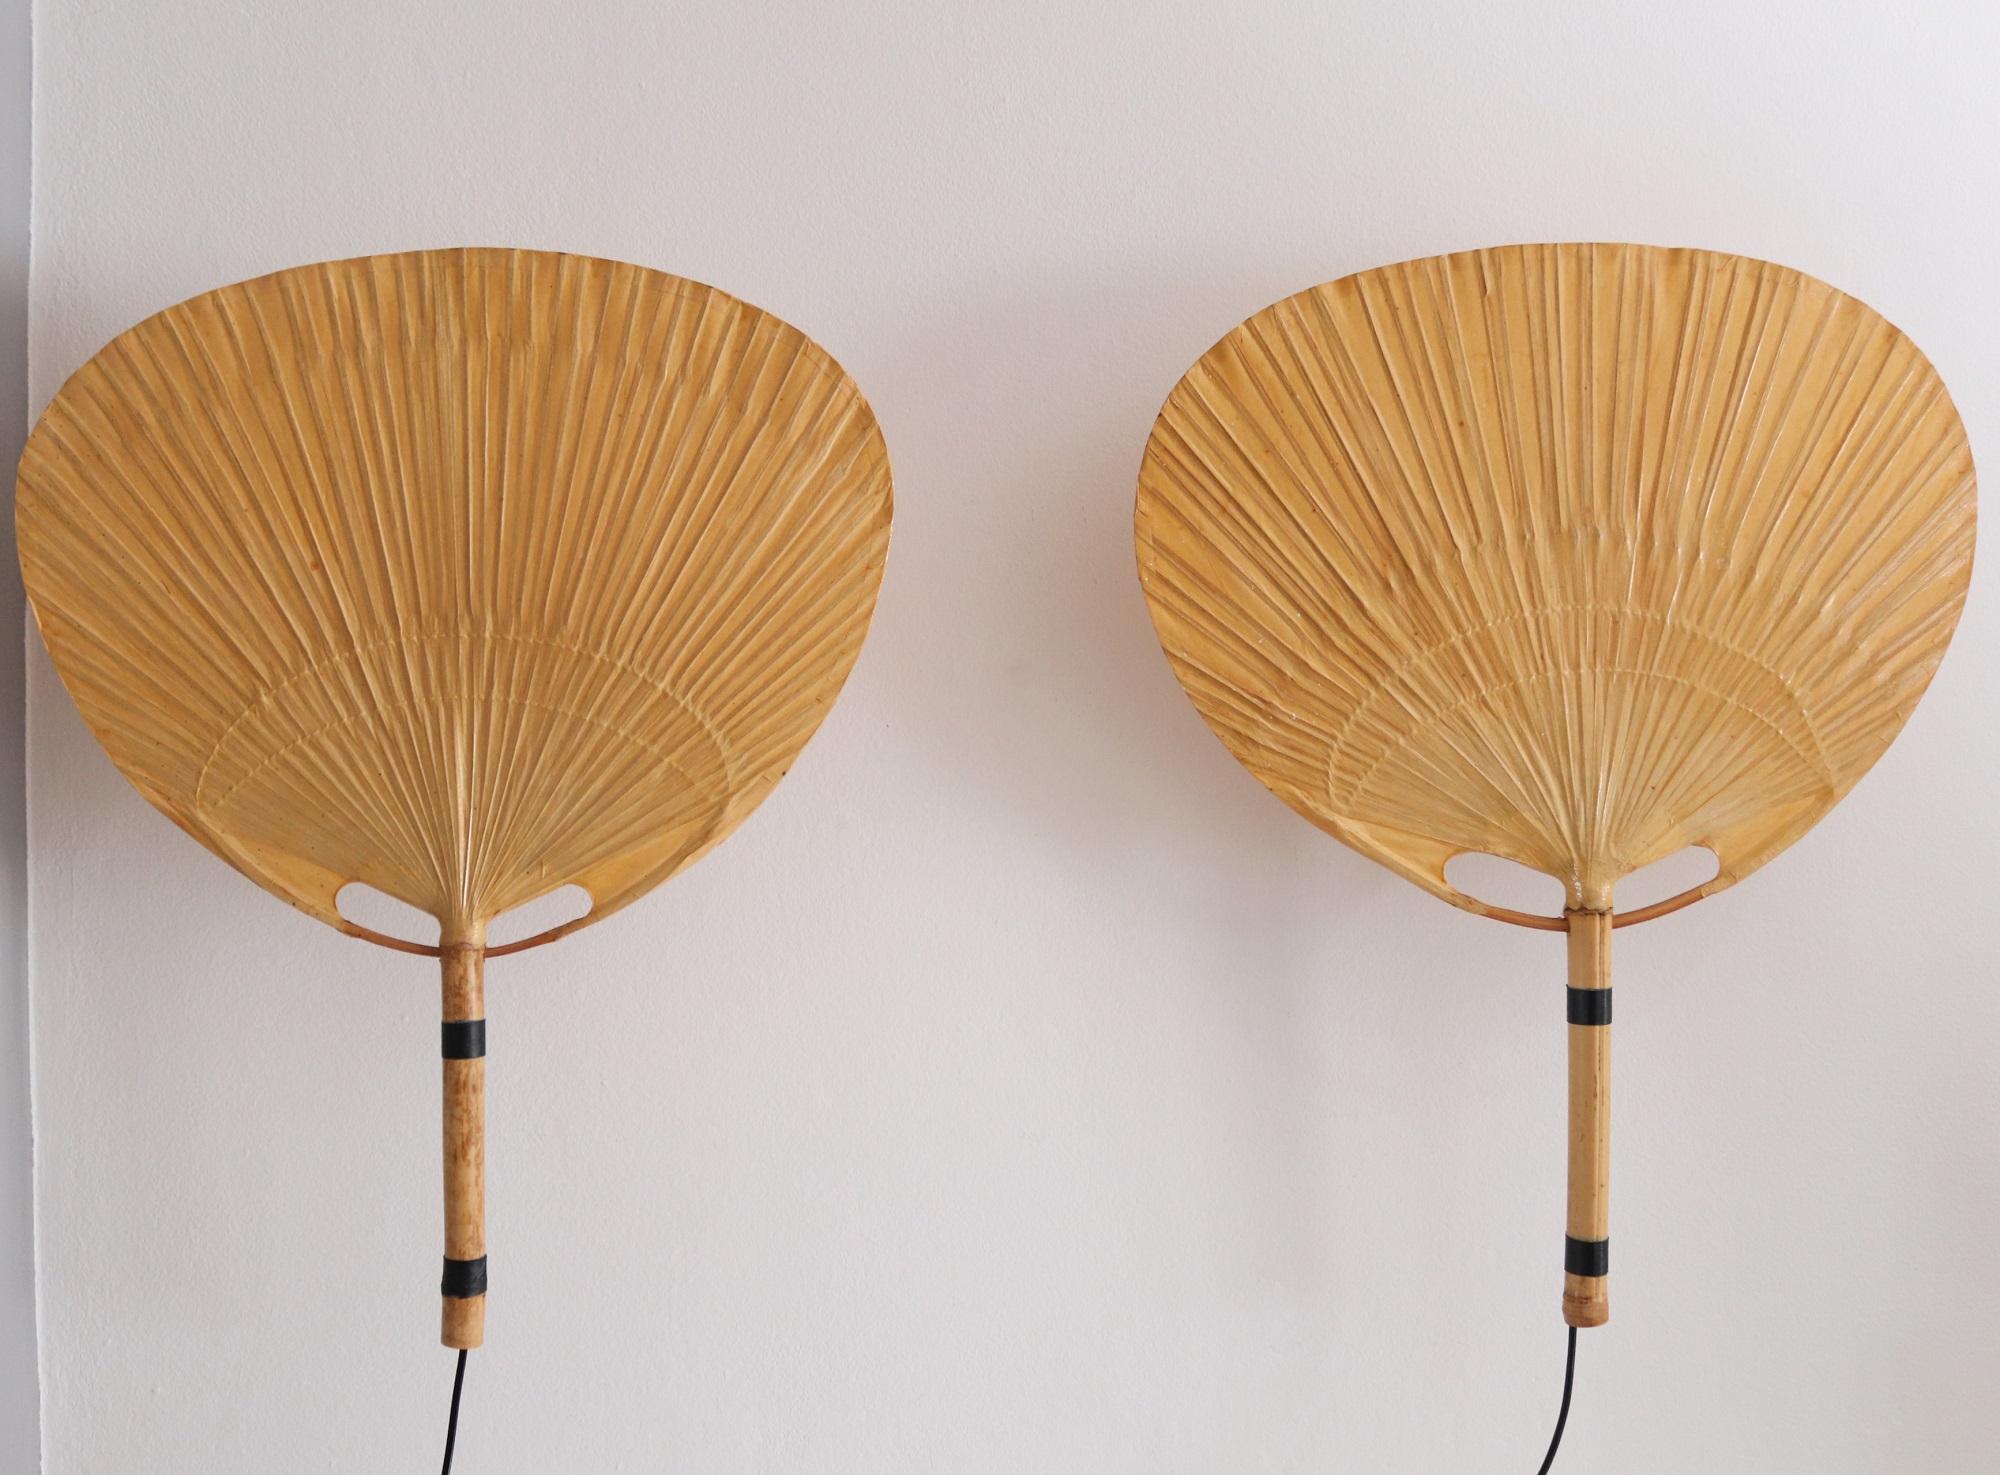 Hand-Crafted Pair of Uchiwa Wall Sconces by Ingo Maurer, Germany, 1973